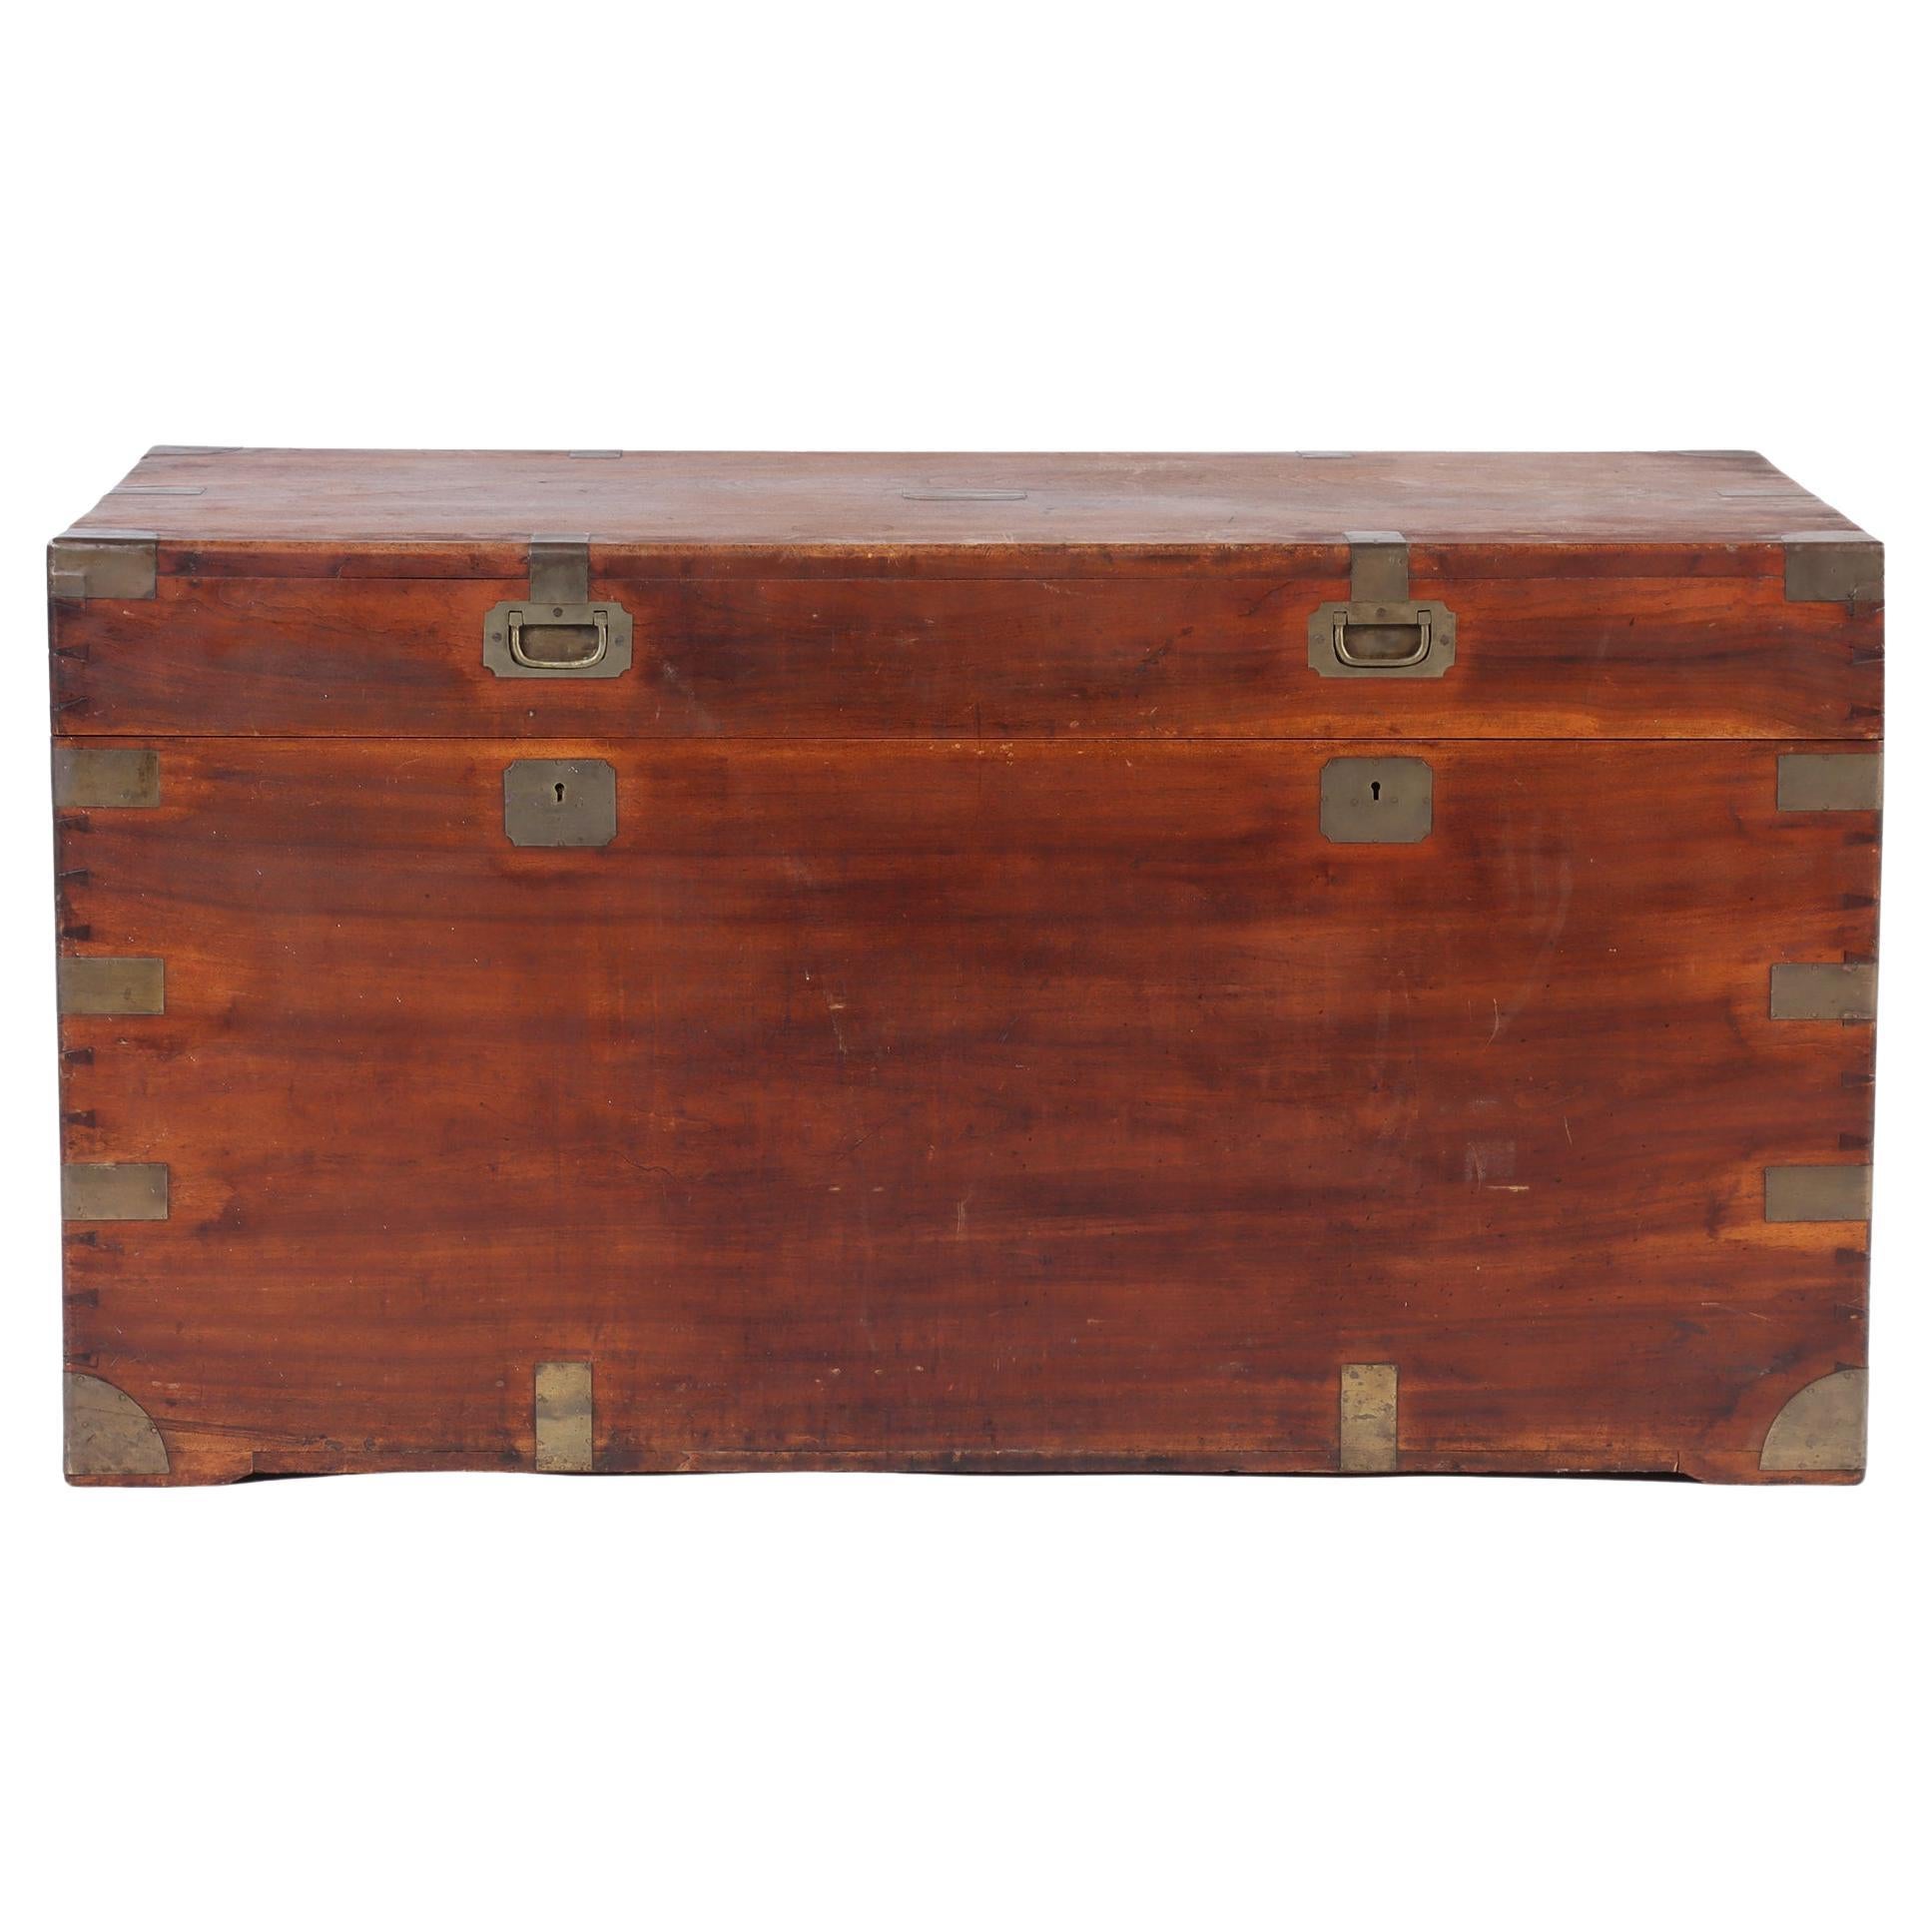 Large Marine Chest / Campaign Chest in Camphor Wood from the 19th Century For Sale